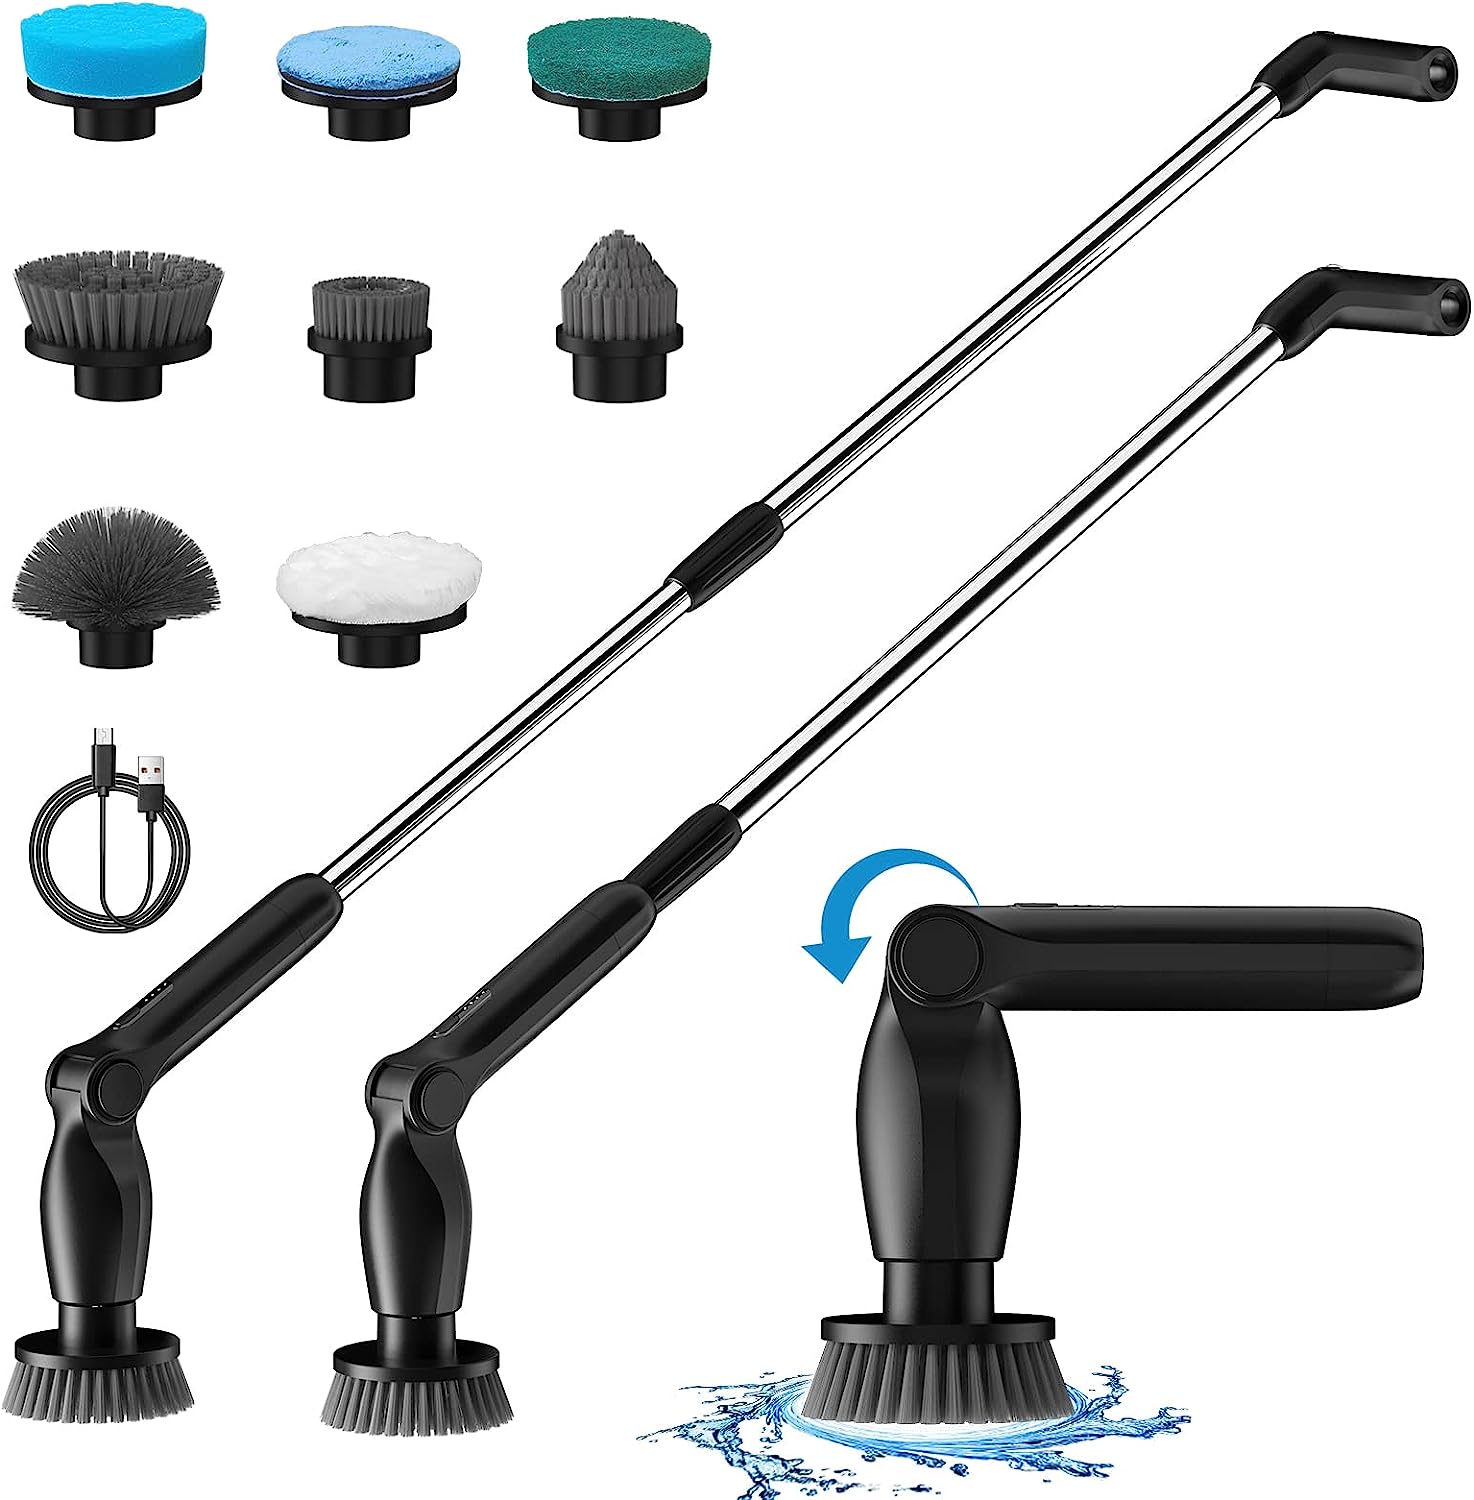 Electric Spin Scrubber Cleaning Brush, Long Handled Shower Scrubber, Tub  Tile Scrubber With 4 Replaceable Brush Heads, 90 Min Run Time Bathroom  Scrubb